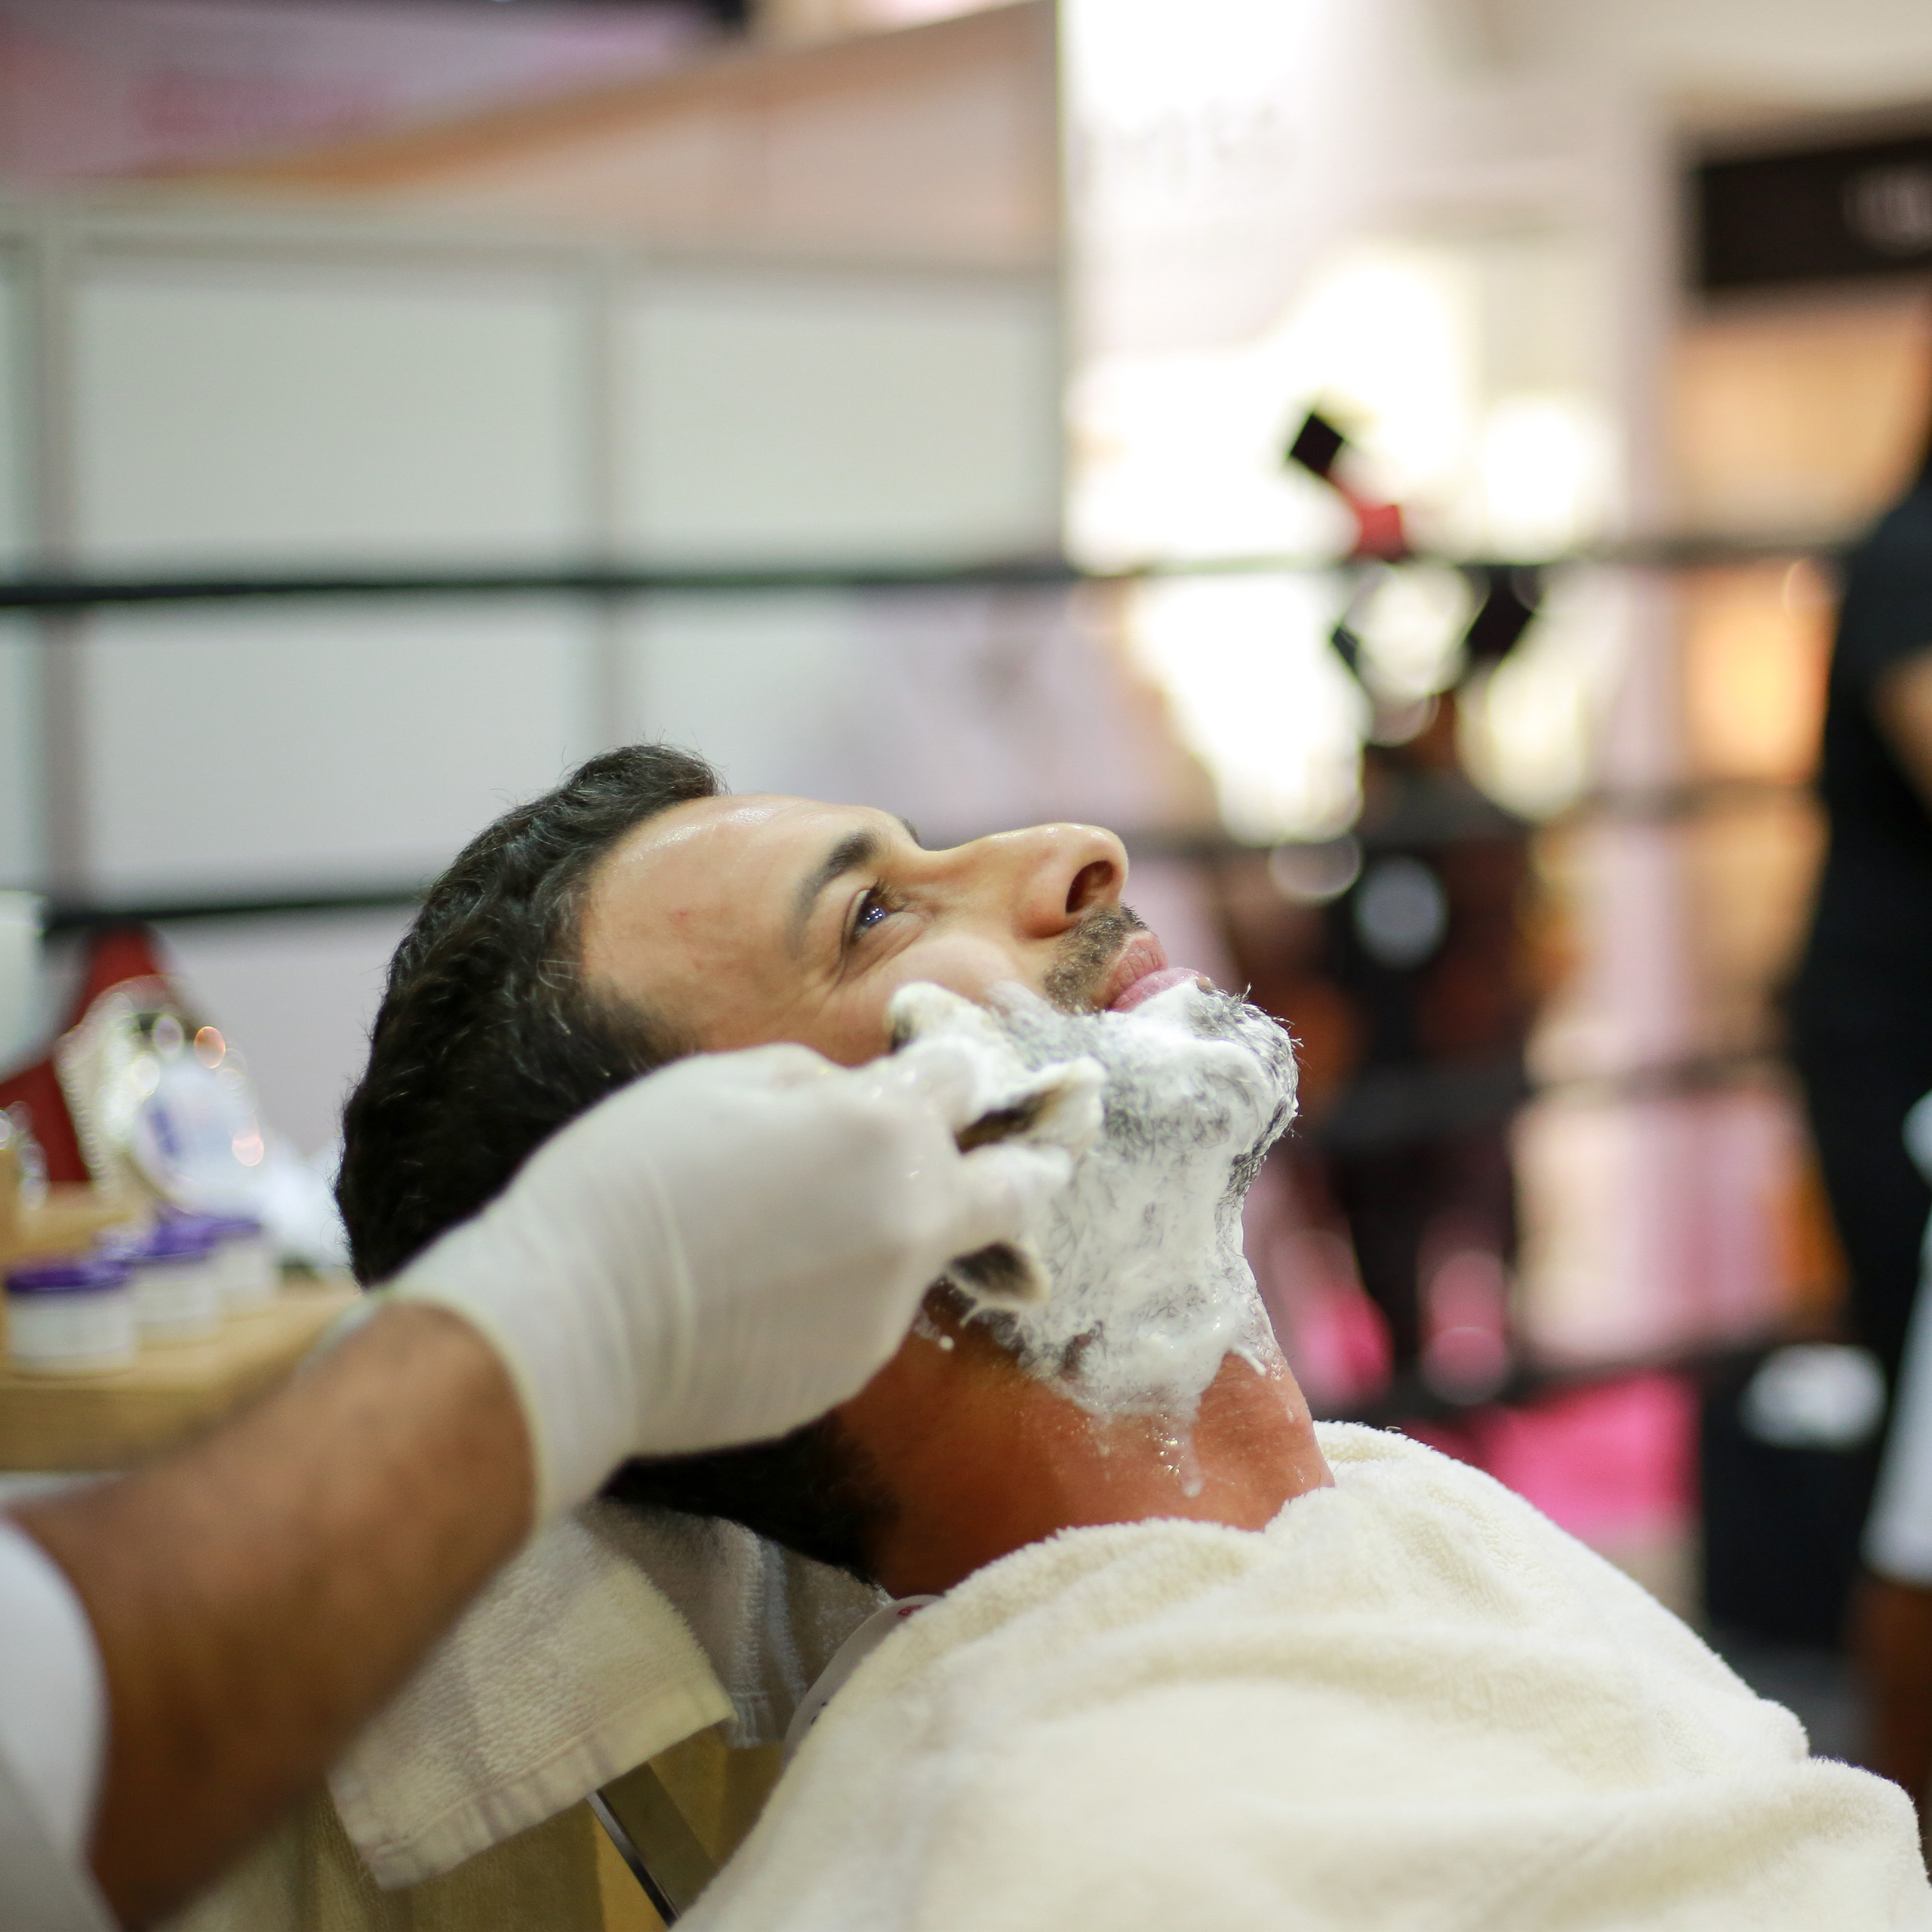 Beautyworld Middle East - UAE’s finest barbers square off in live competition at Beautyworld Middle East 2017